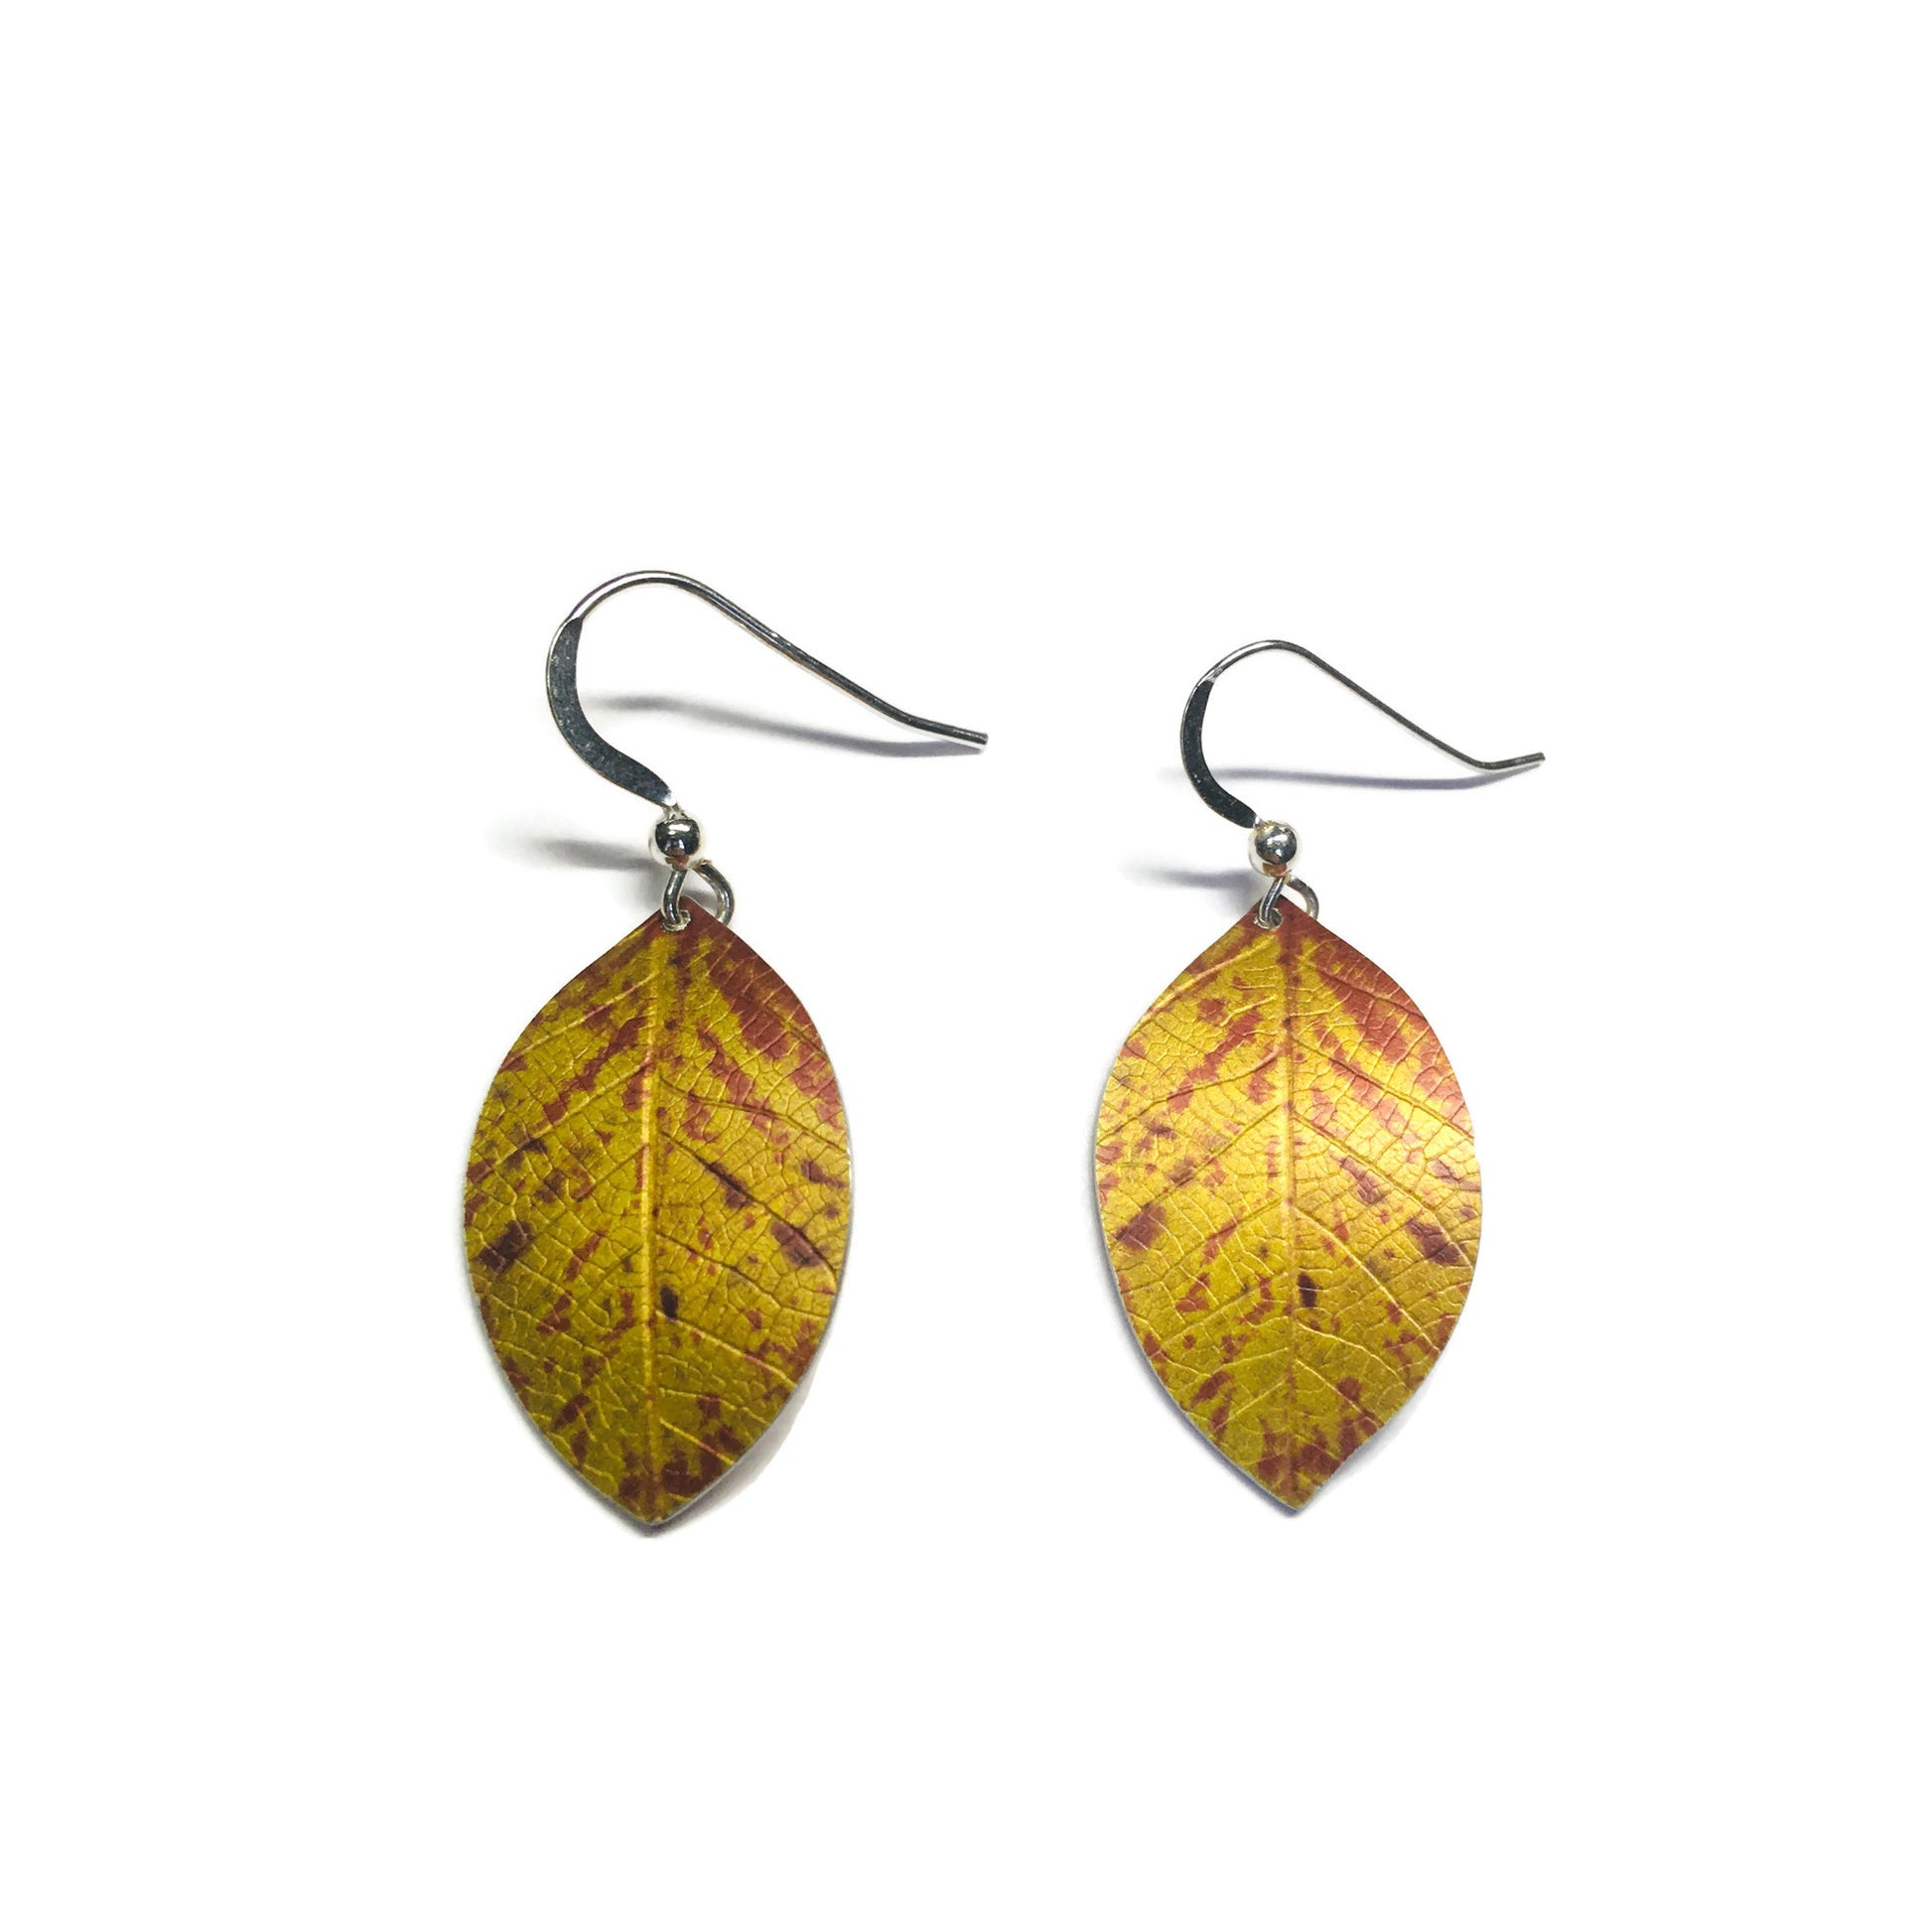 Speckled Beech leaf earrings by Photofinish Jewellery